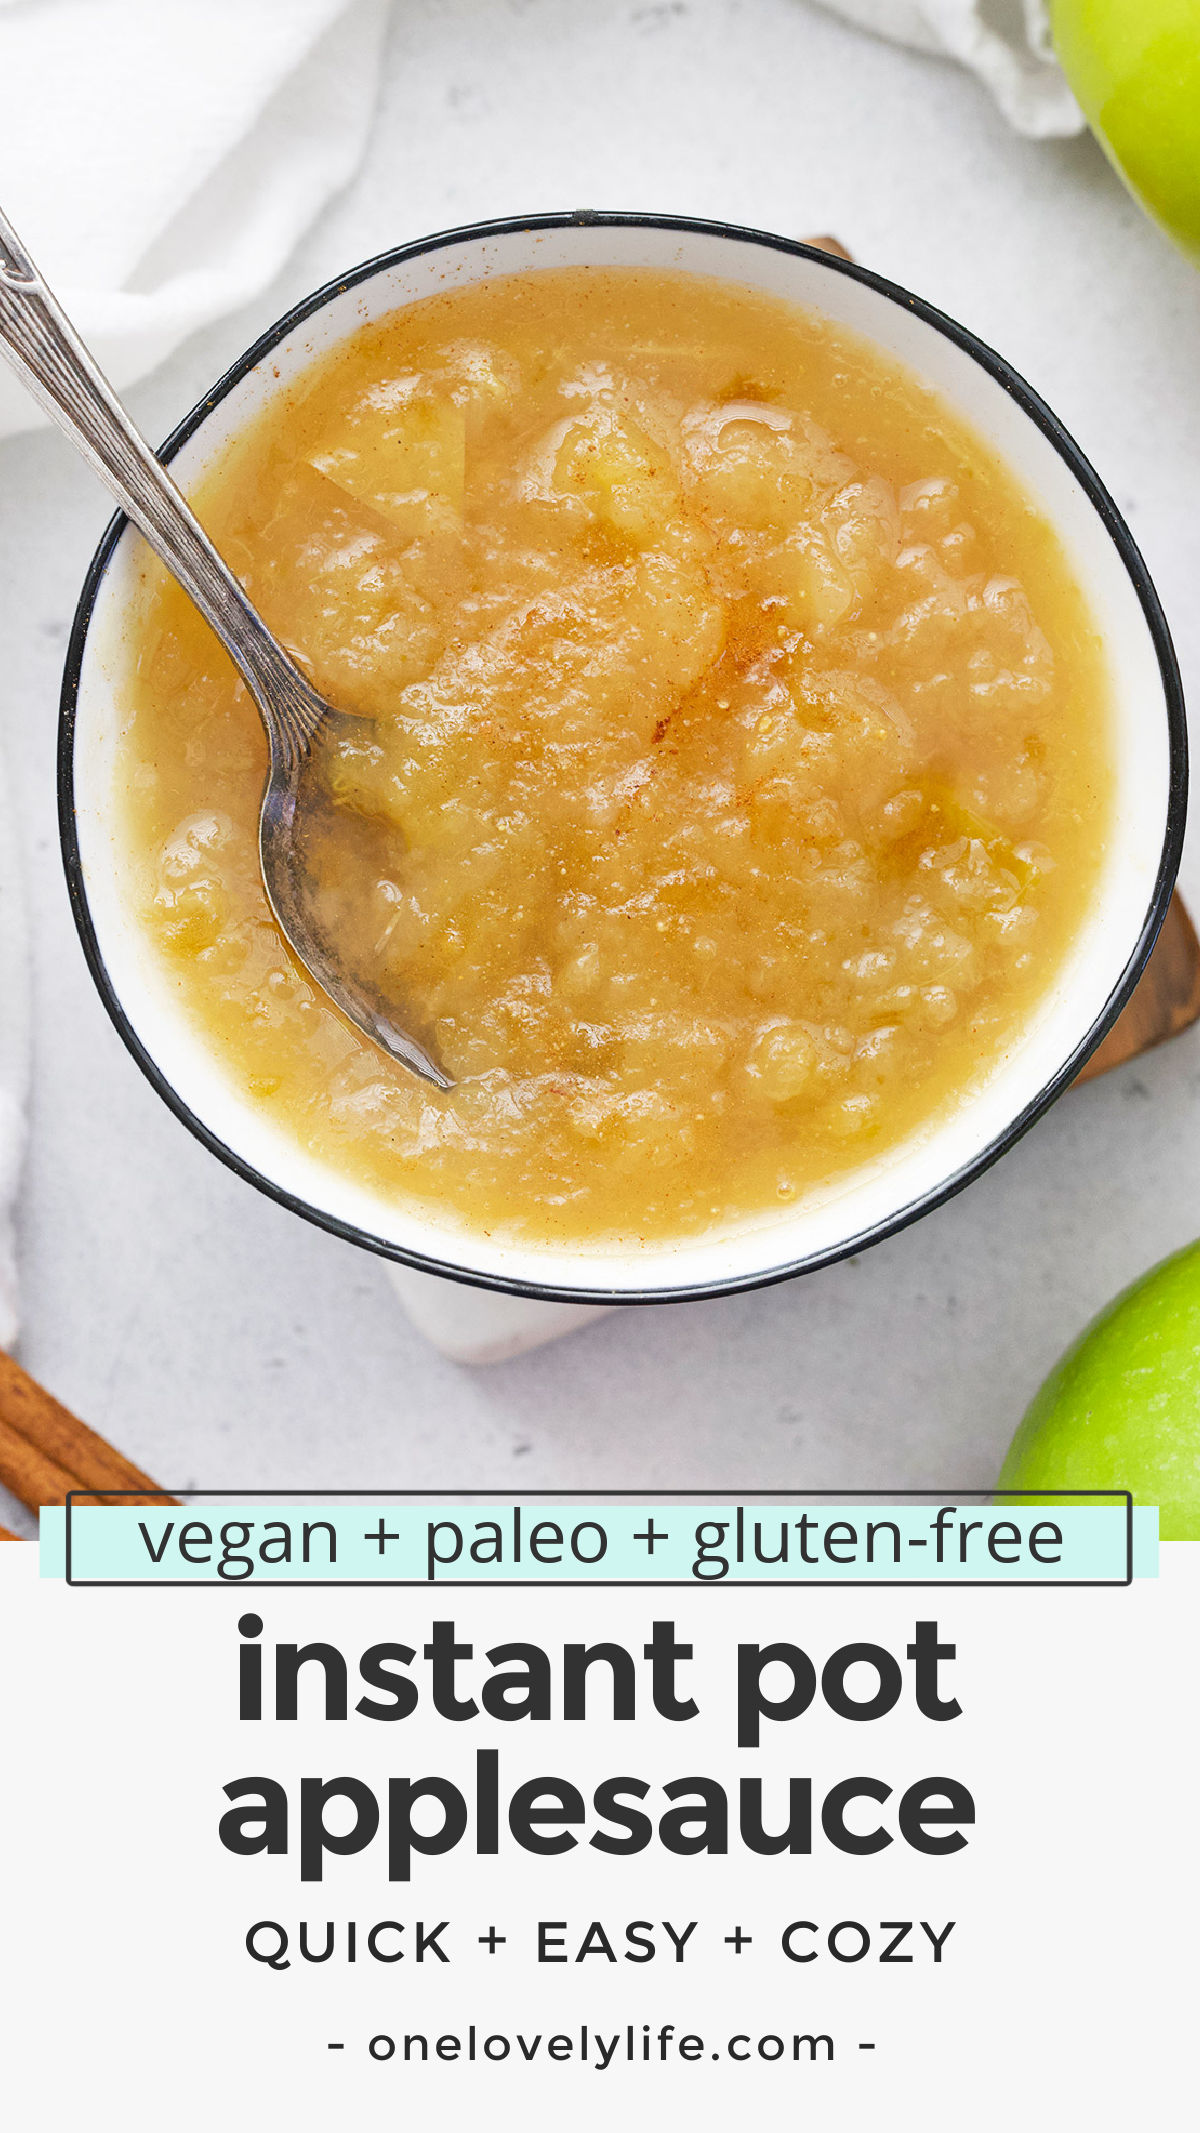 Instant Pot Applesauce - Homemade applesauce made in the pressure cooker! This recipe is easy, delicious, and great for beginners! (Paleo, Vegan) // Instant Pot Applesauce Recipe // No Sugar Added Applesauce // Unsweetened Instant Pot Applesauce #applesauce #instantpot #pressurecooker #sidedish #applerecipes #paleo #vegan